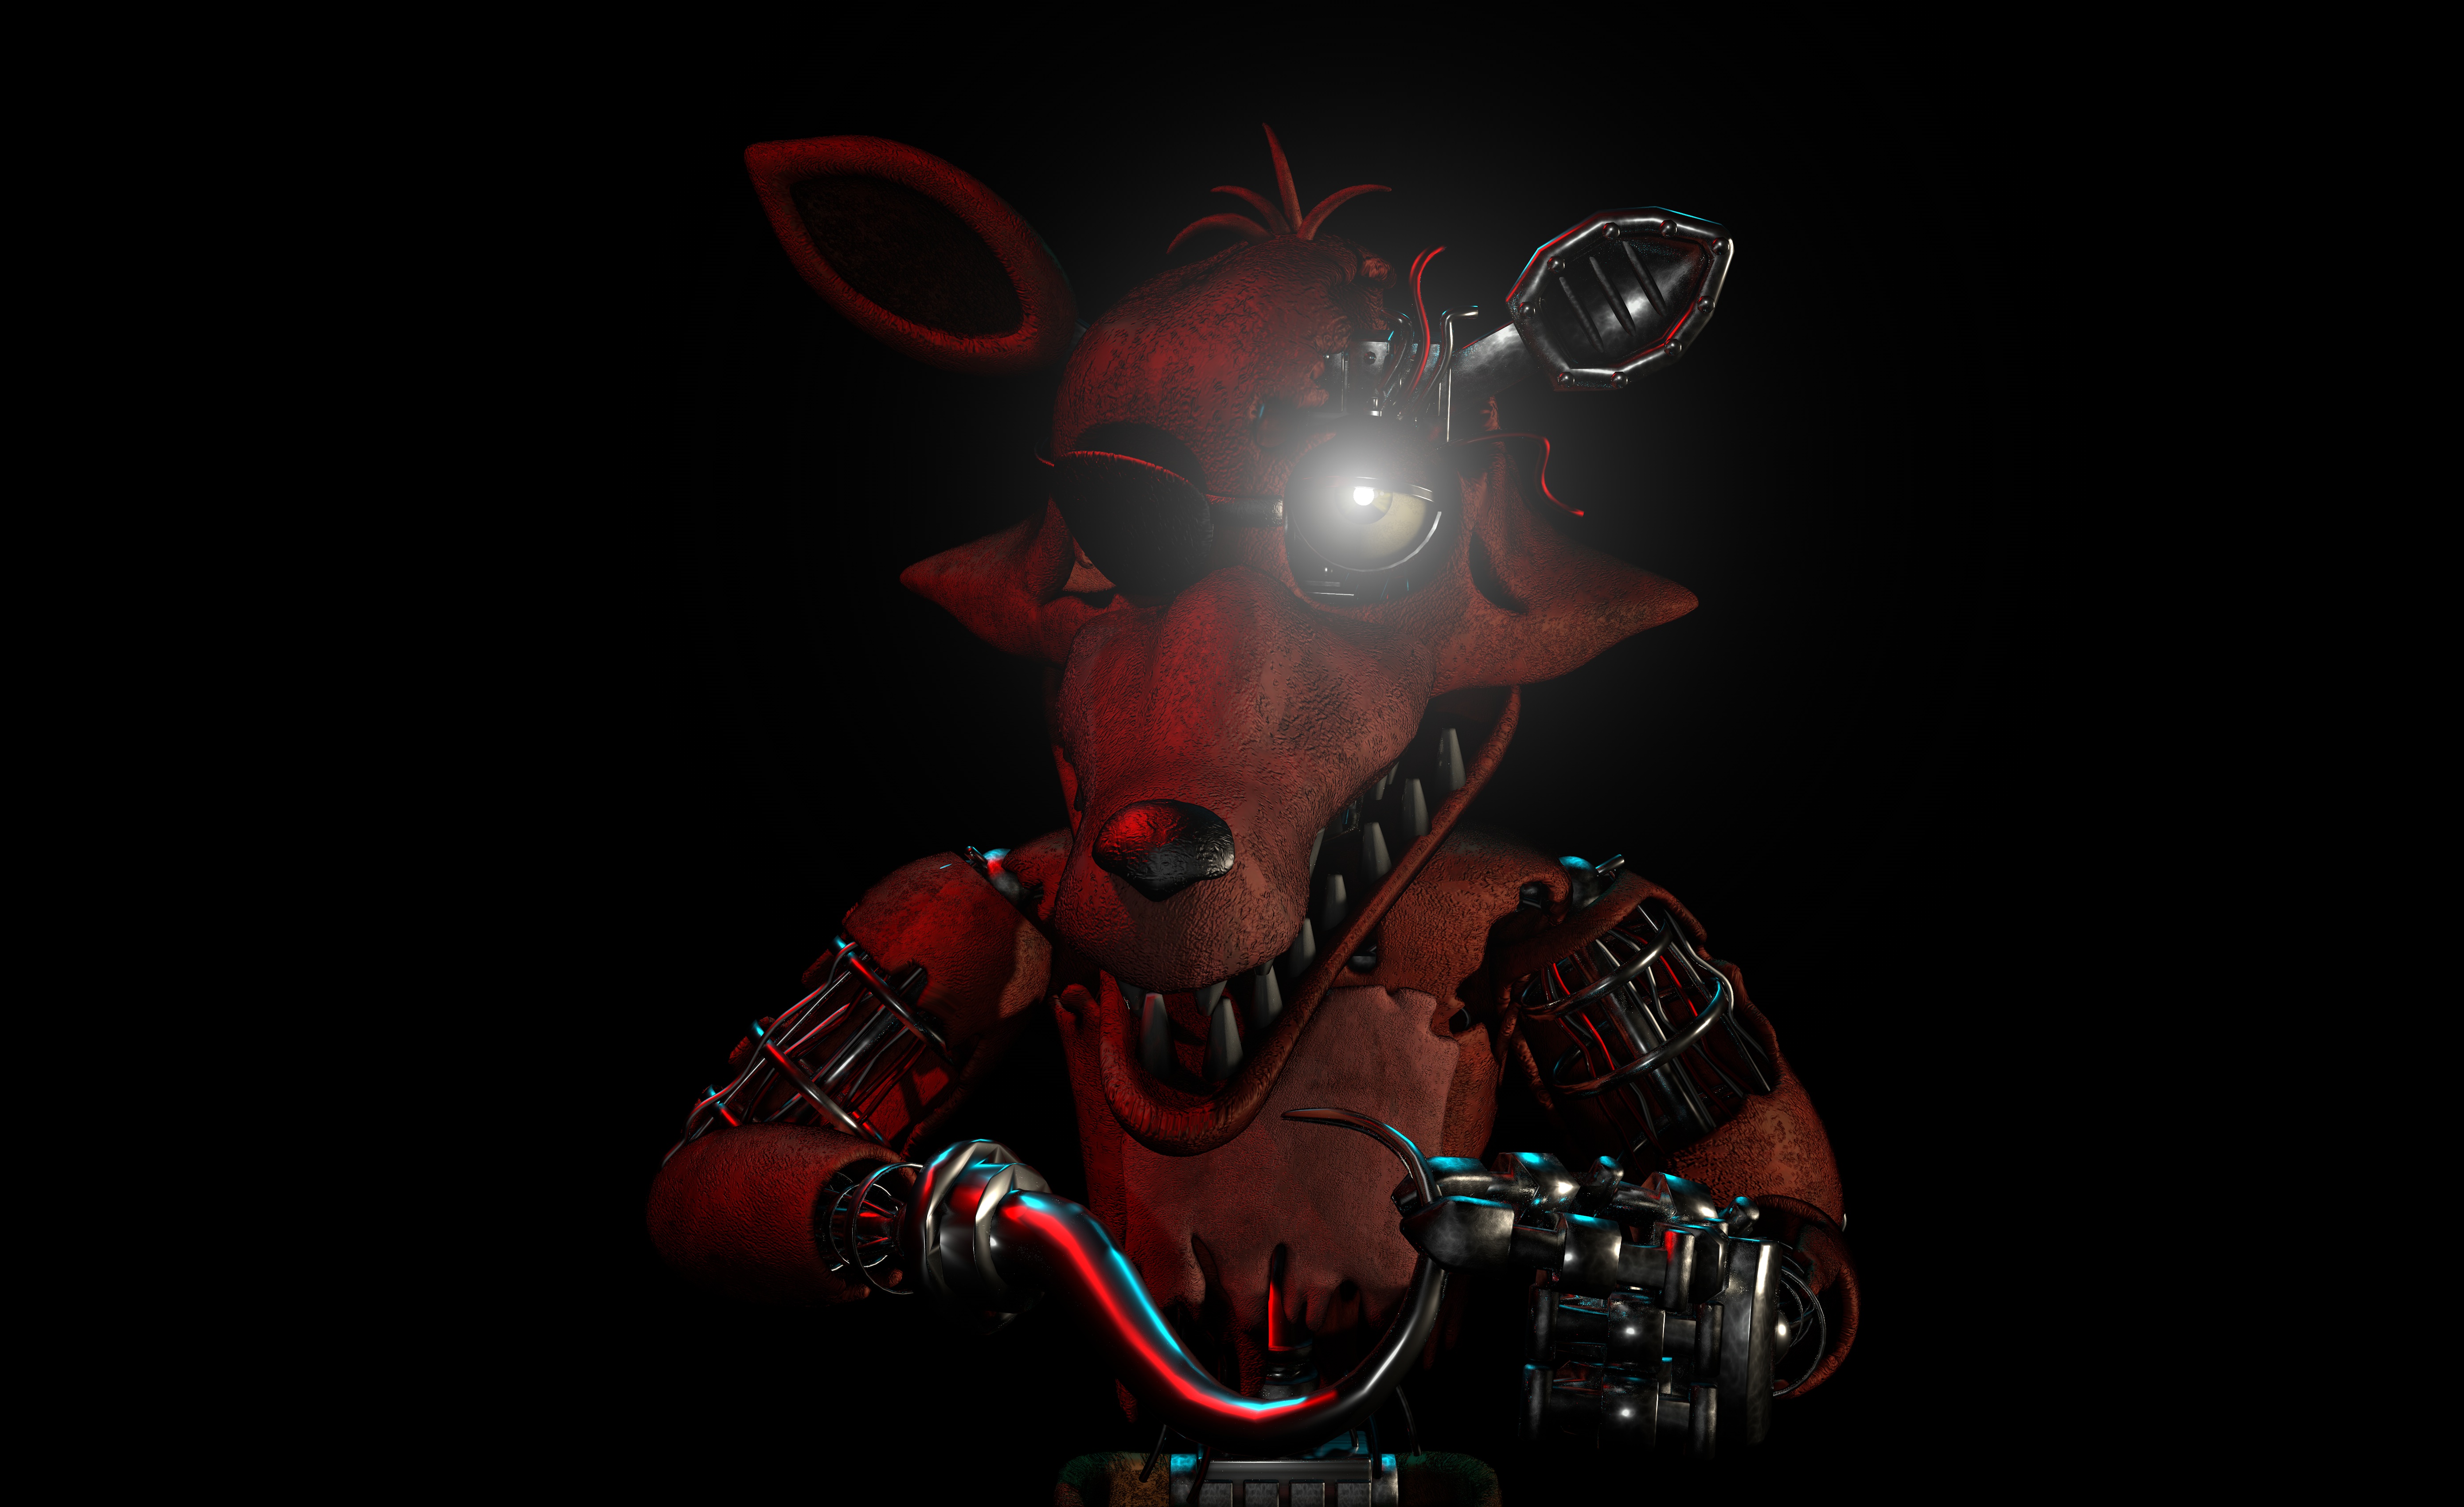 FNAF 2) Withered Foxy Poster by TheUnbearable101 on DeviantArt